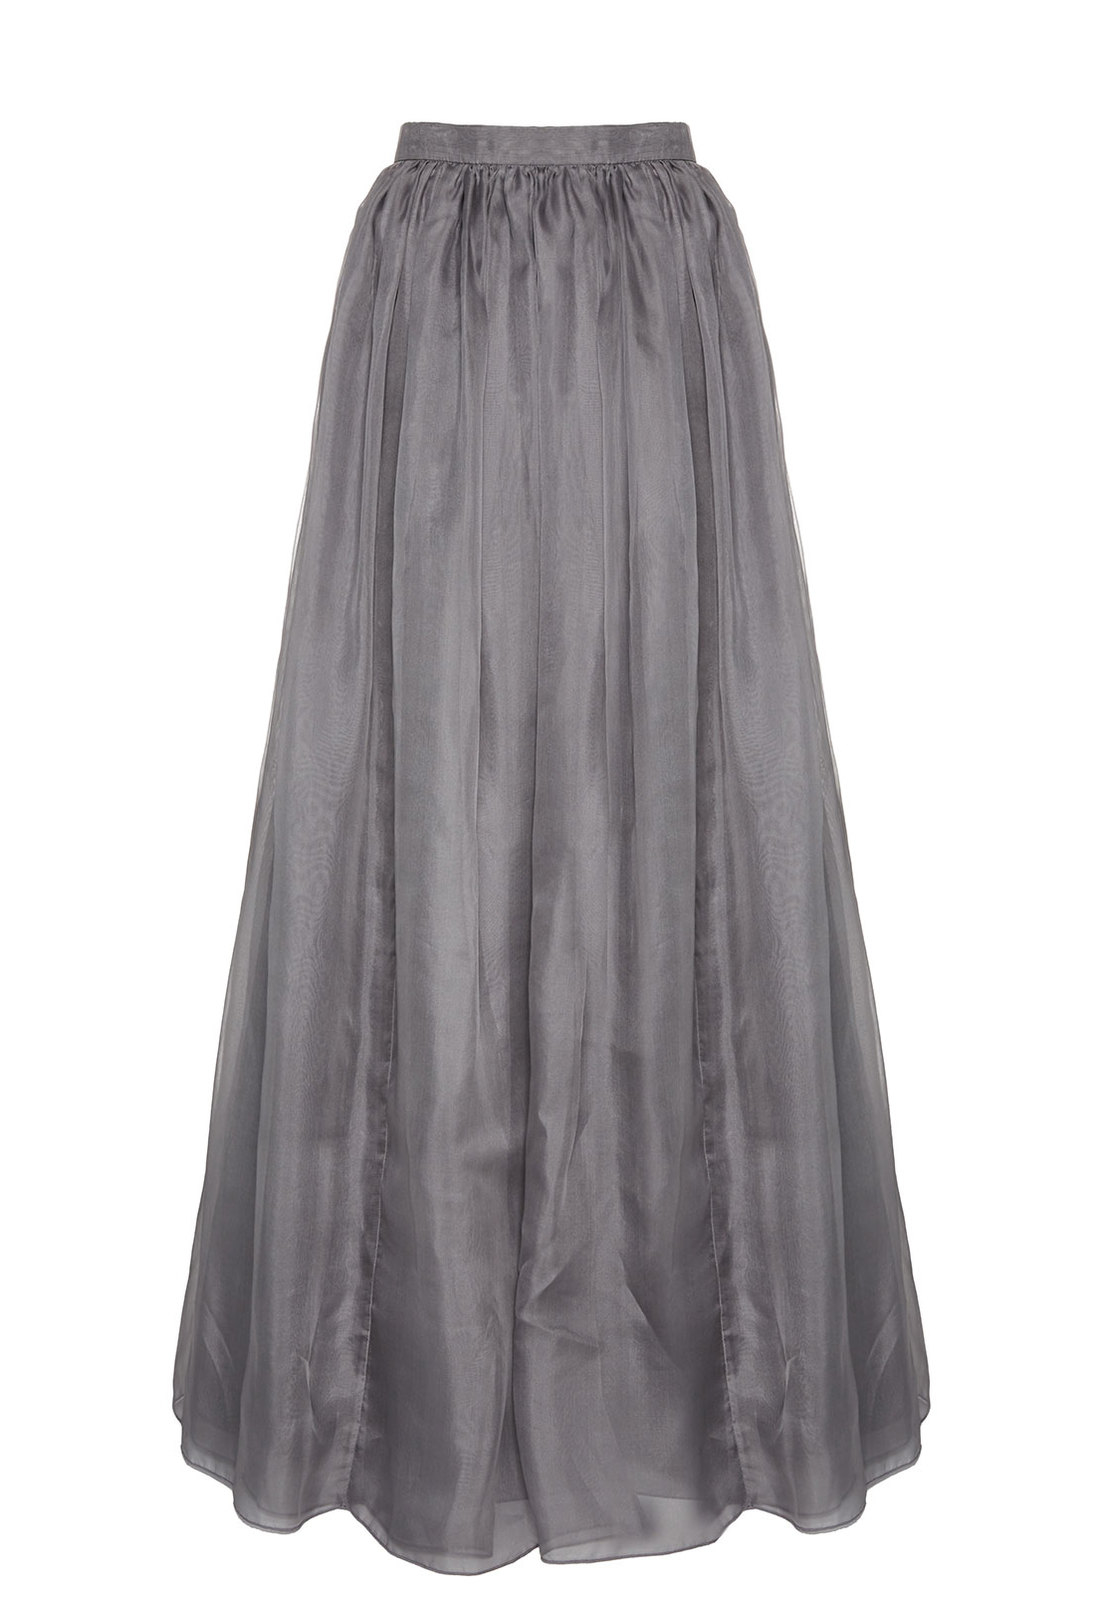 Lyst - Alice + olivia Abella Long Ball Gown Skirt in Gray